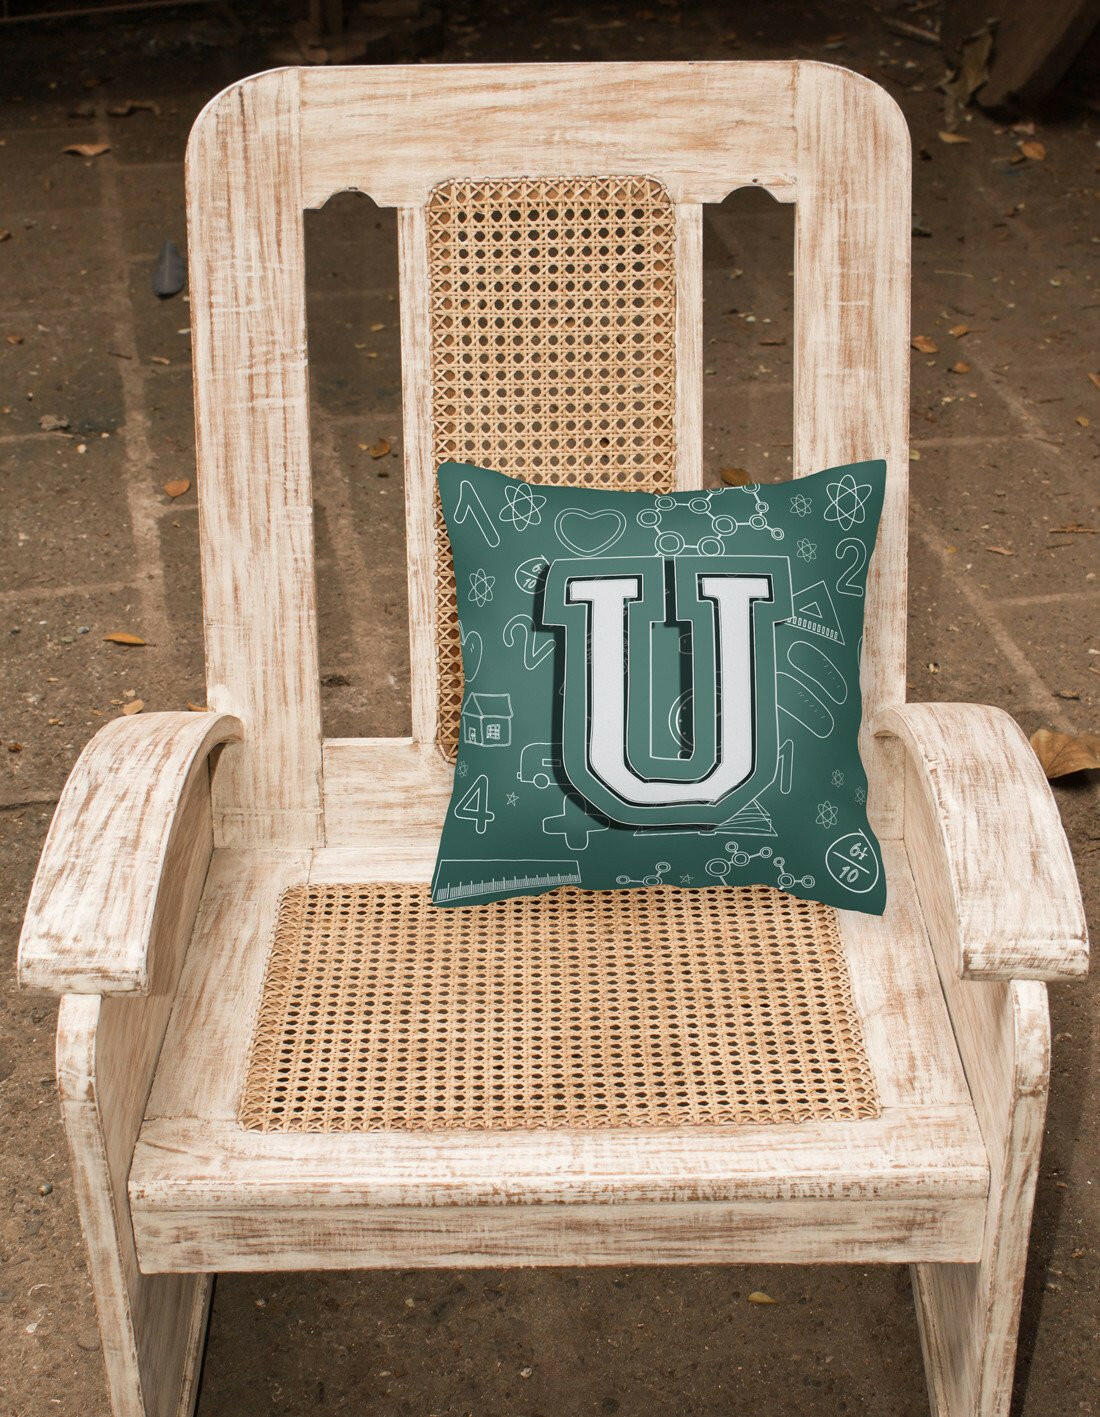 Letter U Back to School Initial Canvas Fabric Decorative Pillow CJ2010-UPW1414 by Caroline's Treasures